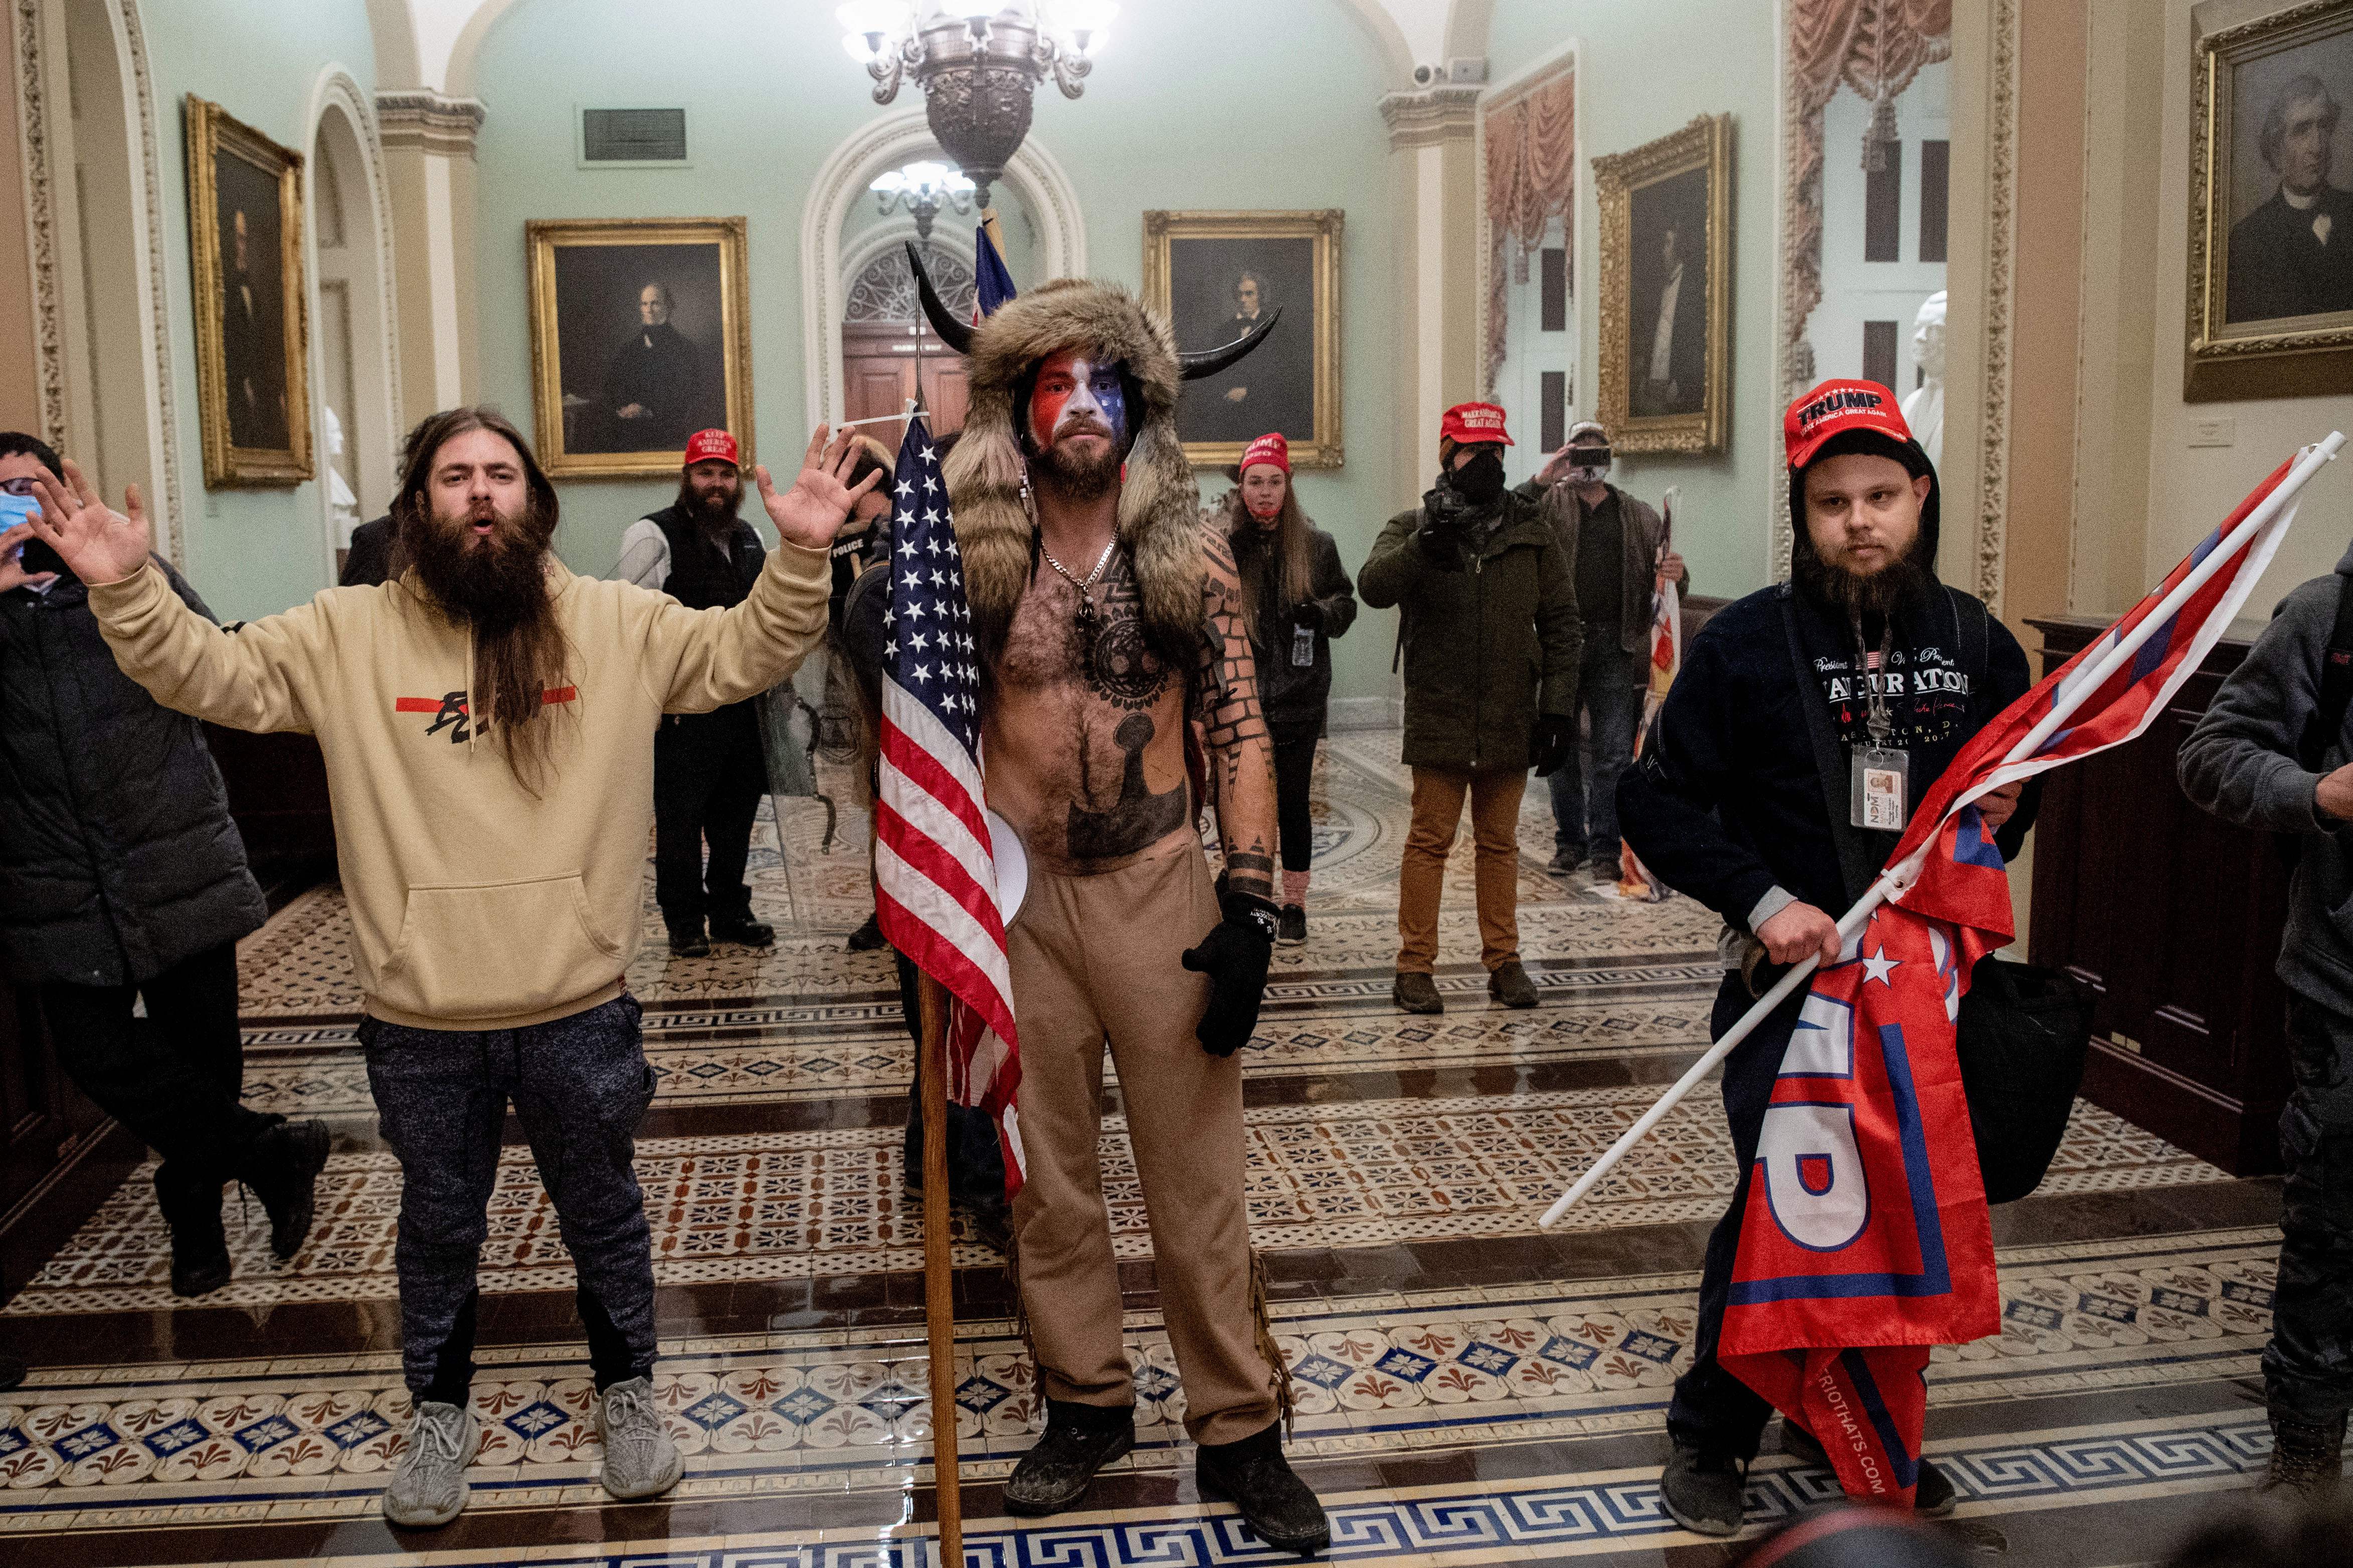 Insurrectionists posing inside the Capitol building on January 6, 2021.